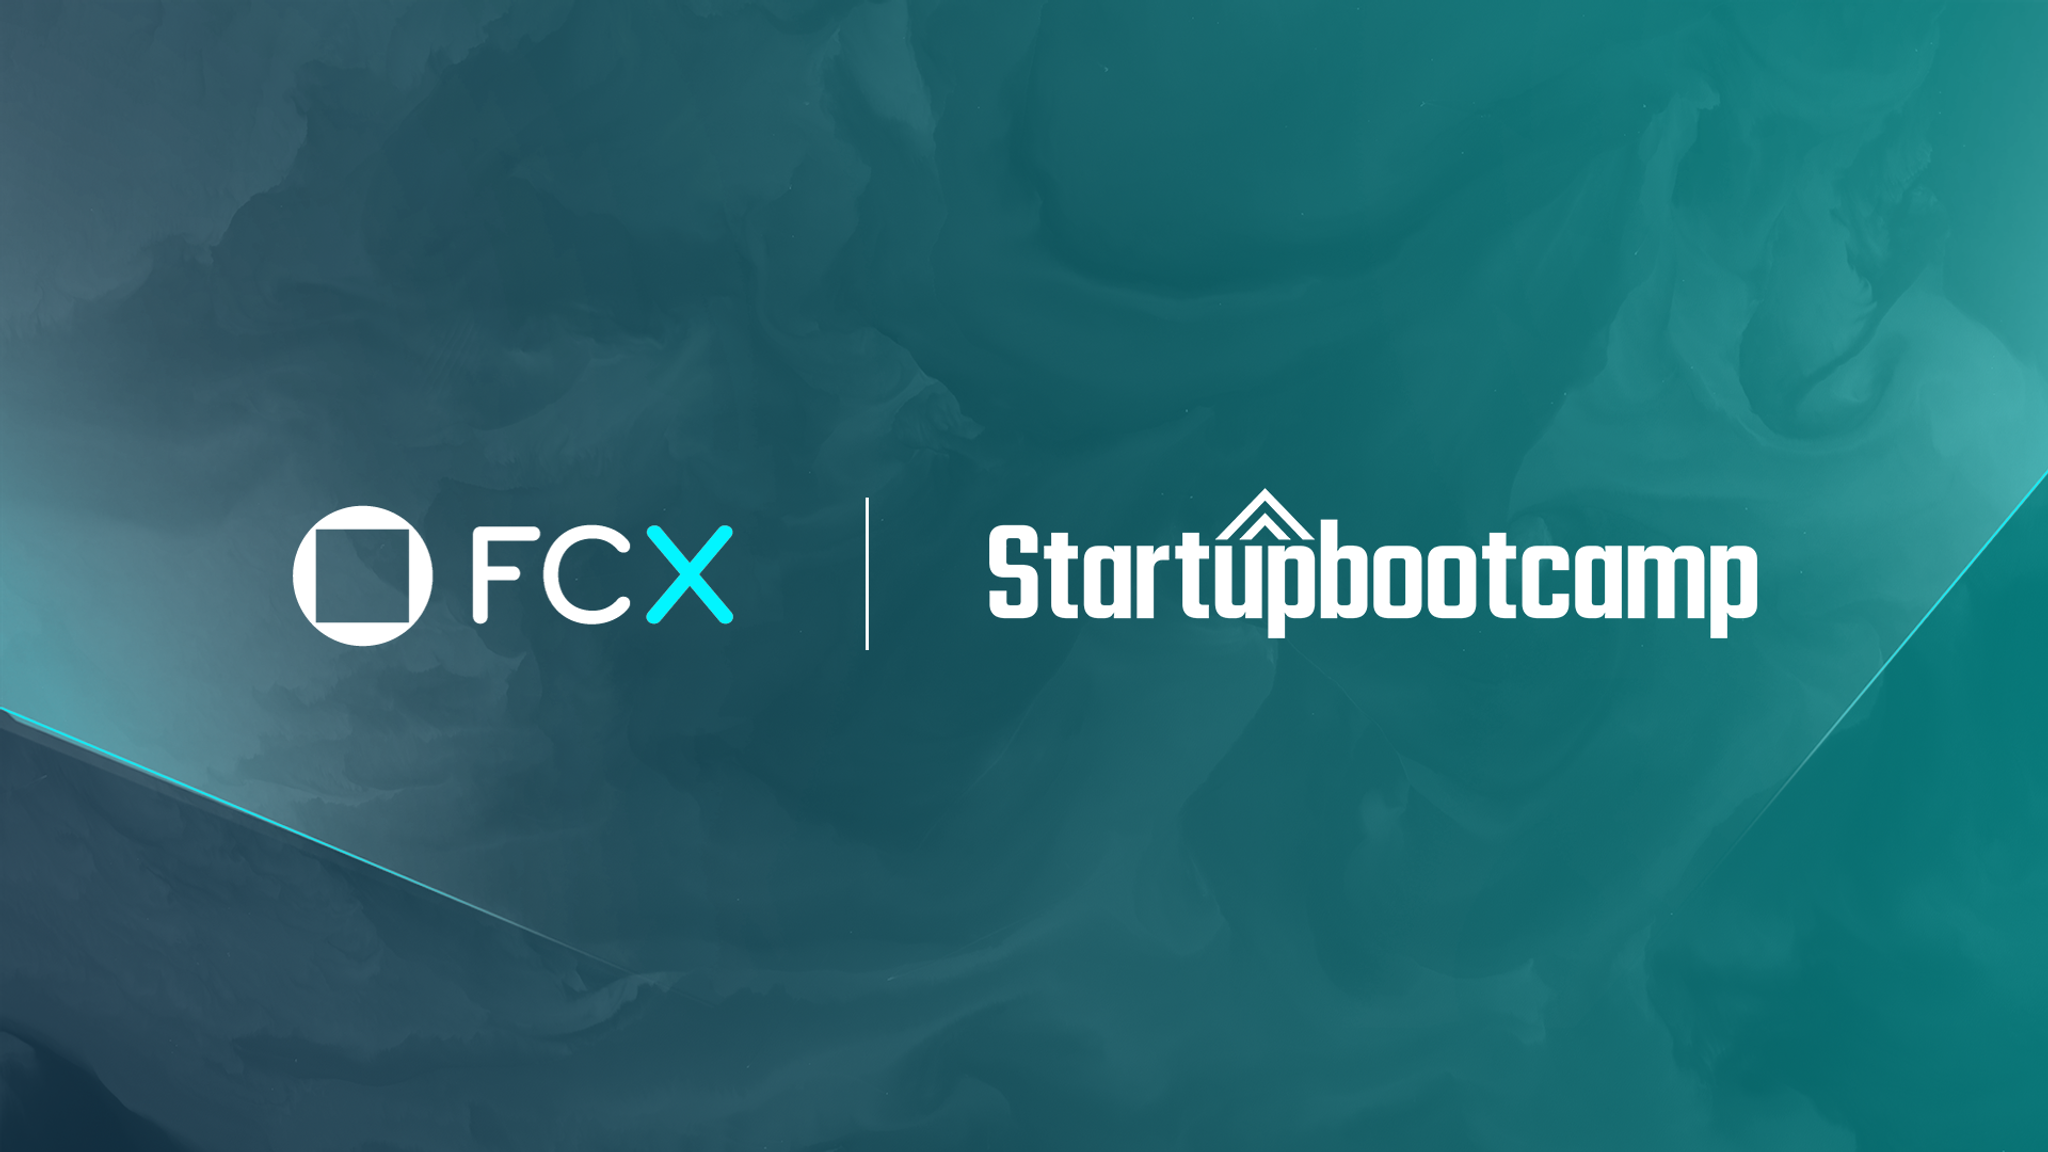 FCX has partnered with Startupbootcamp Australia to Accelerate Fintech!